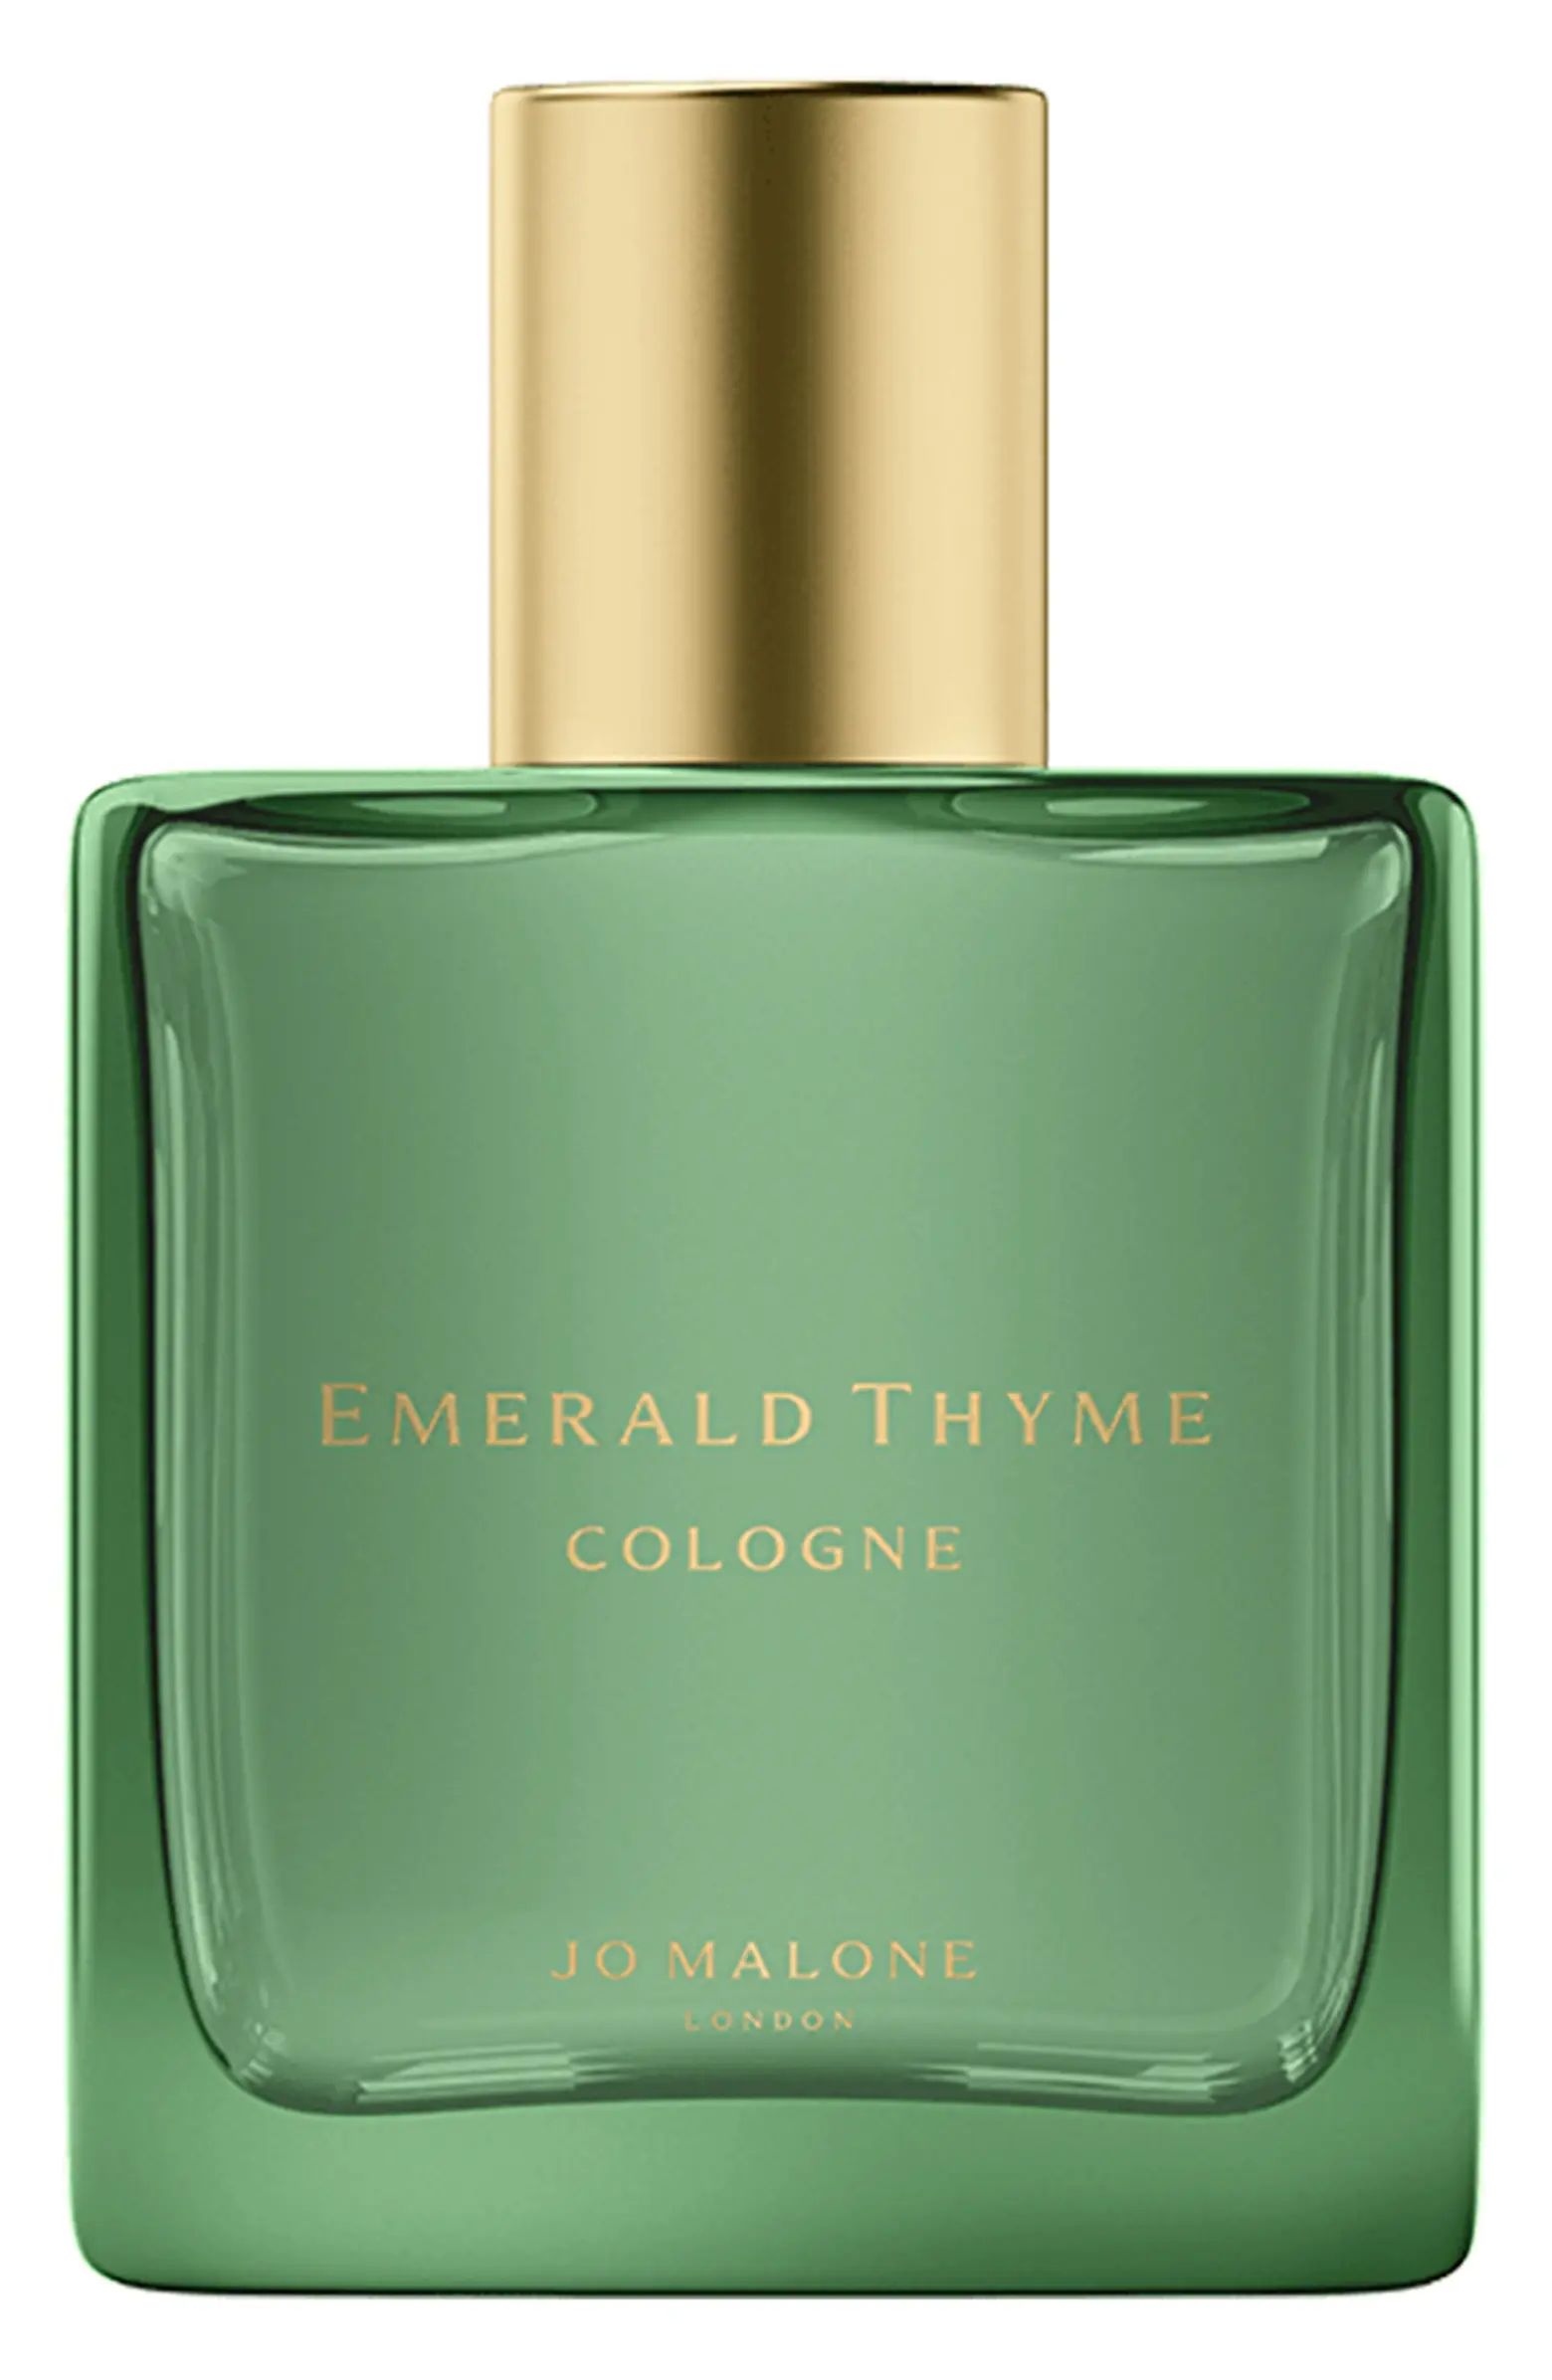 Emerald Thyme Cologne | Nordstrom